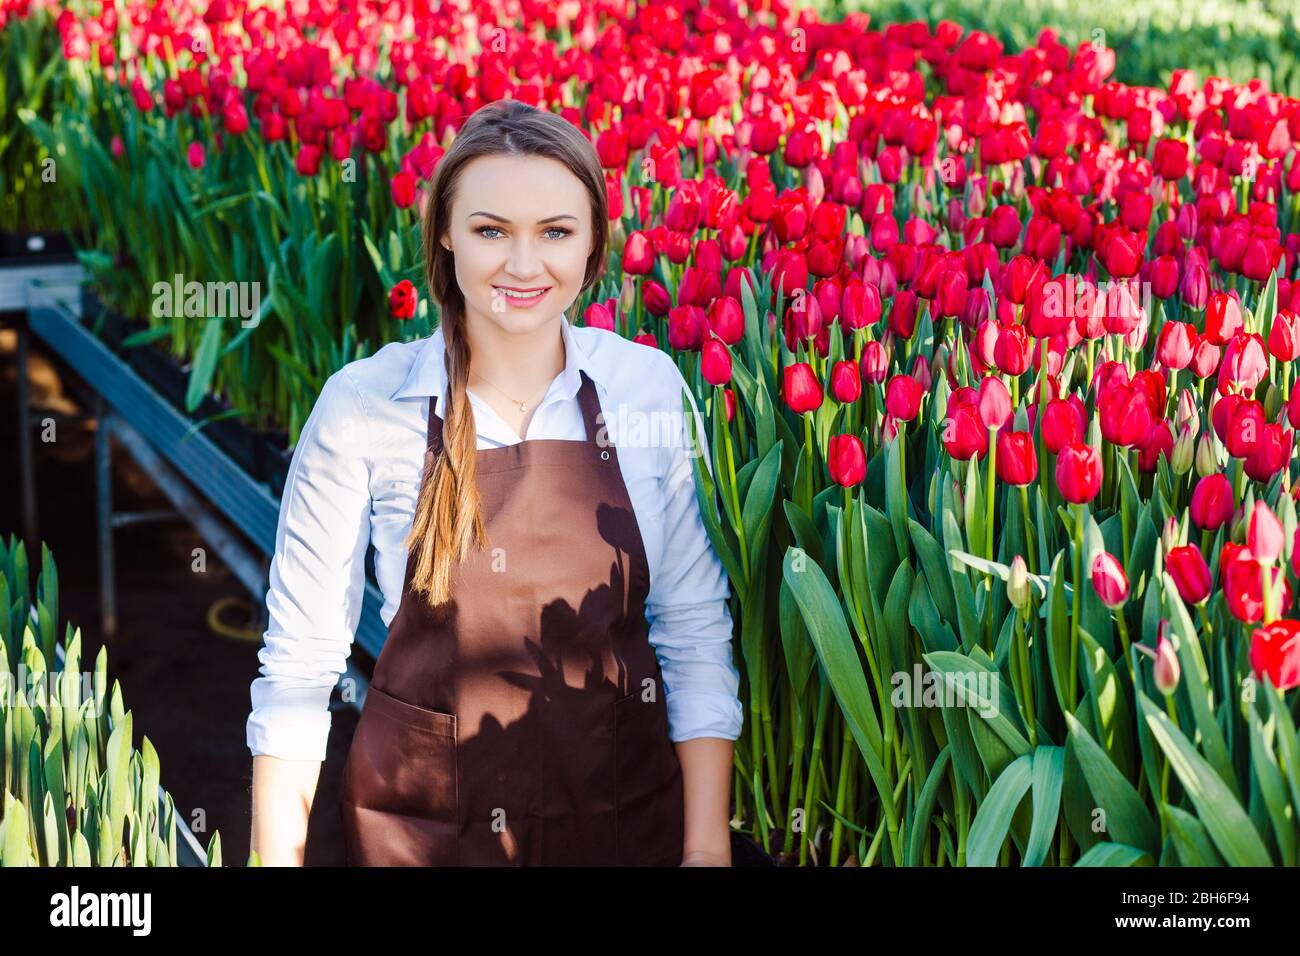 Woman gardener dressed in working uniform, smiling looking at camera, standing in big greenhouse. Industrial cultivation of flowers Stock Photo